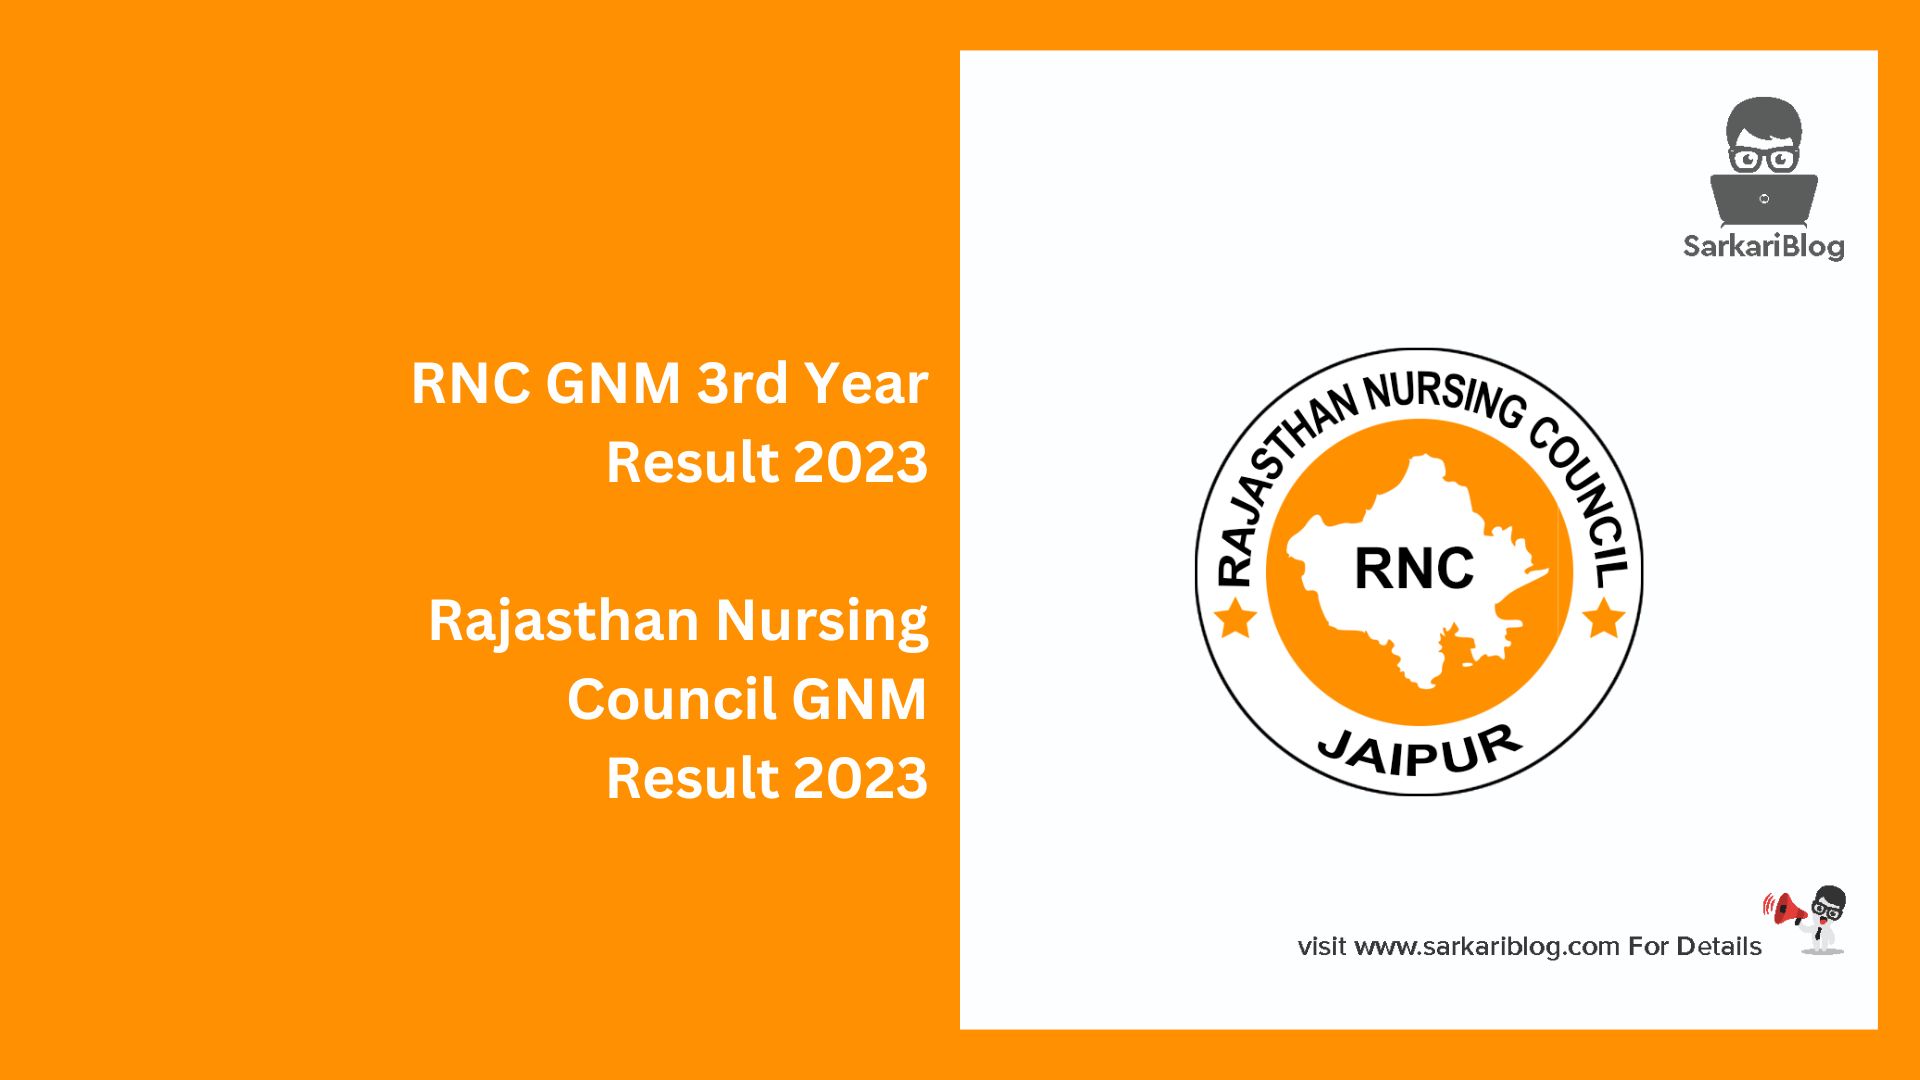 RNC GNM 3rd Year Result 2023